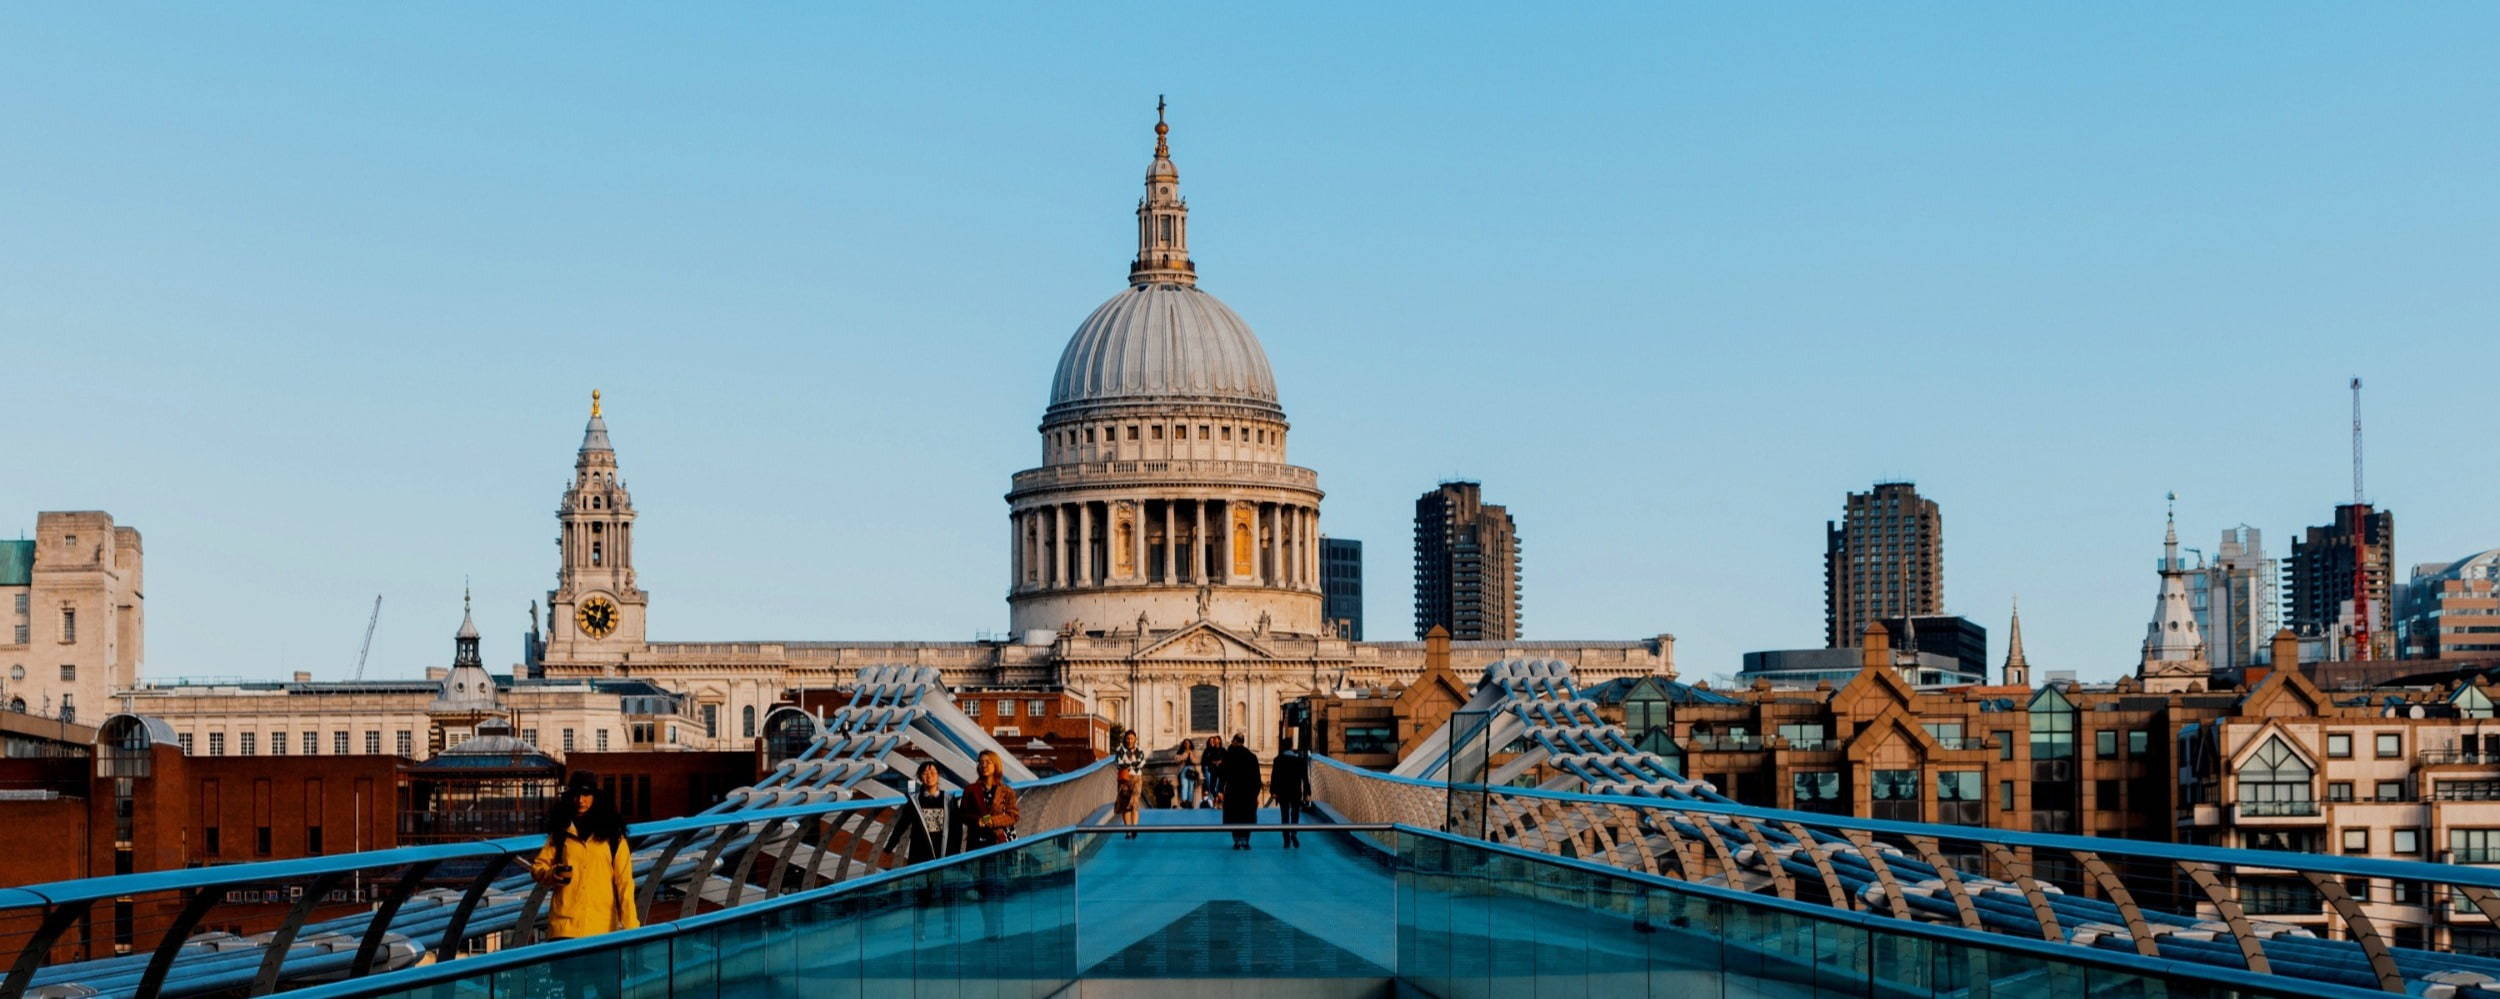 Wide-shot image of St. Pauls Cathedral